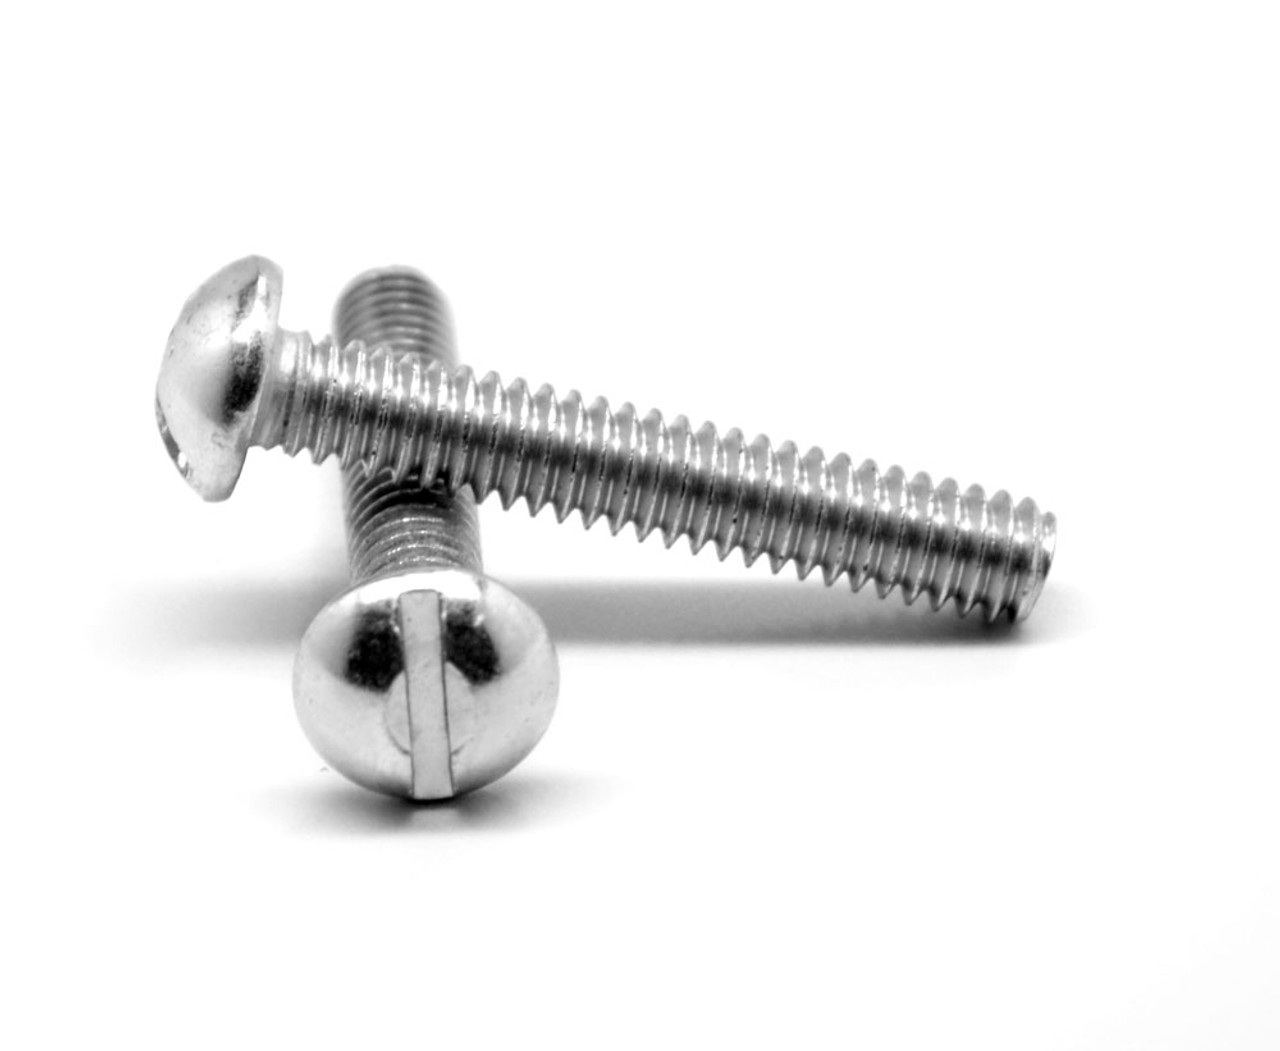 1/4"-20 x 5/8" (FT) Coarse Thread Machine Screw Slotted Round Head Low Carbon Steel Zinc Plated